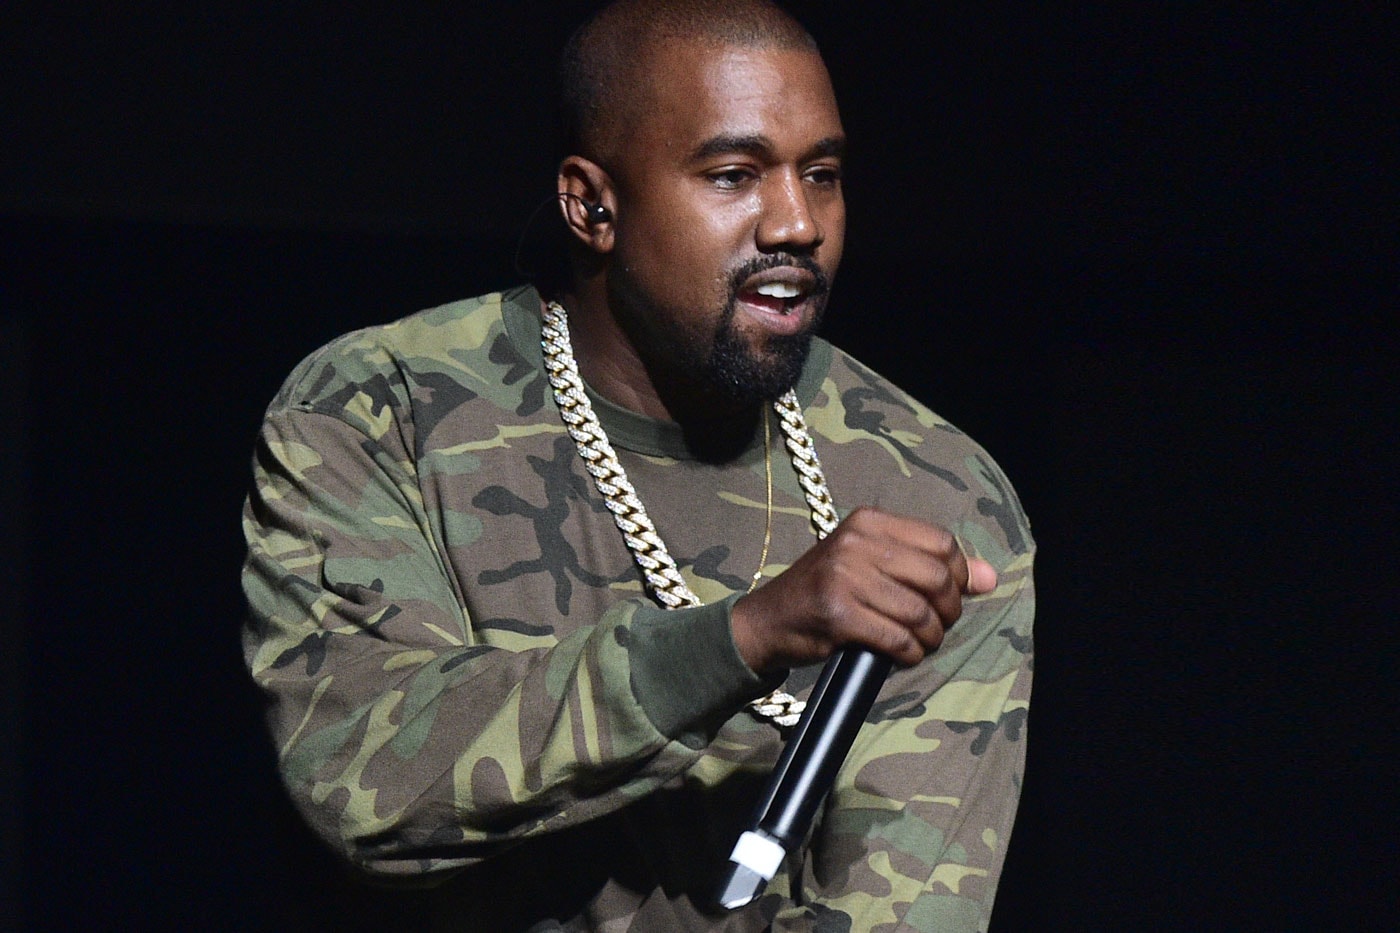 Kanye West Played 'SWISH' "On Repeat" While in Toronto